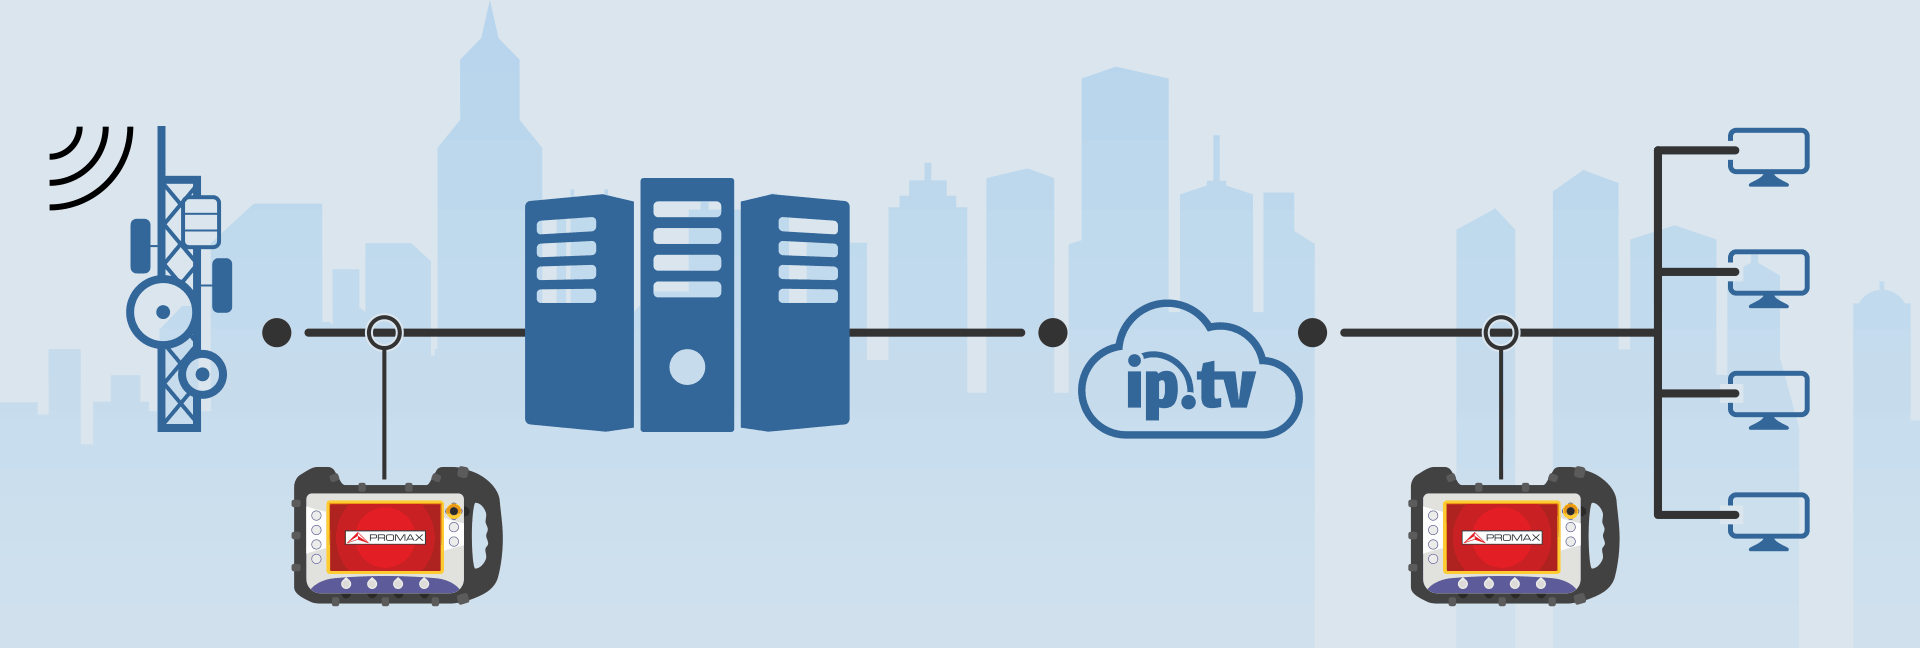 The global solution in test and measurement for IPTV and OTT network operators